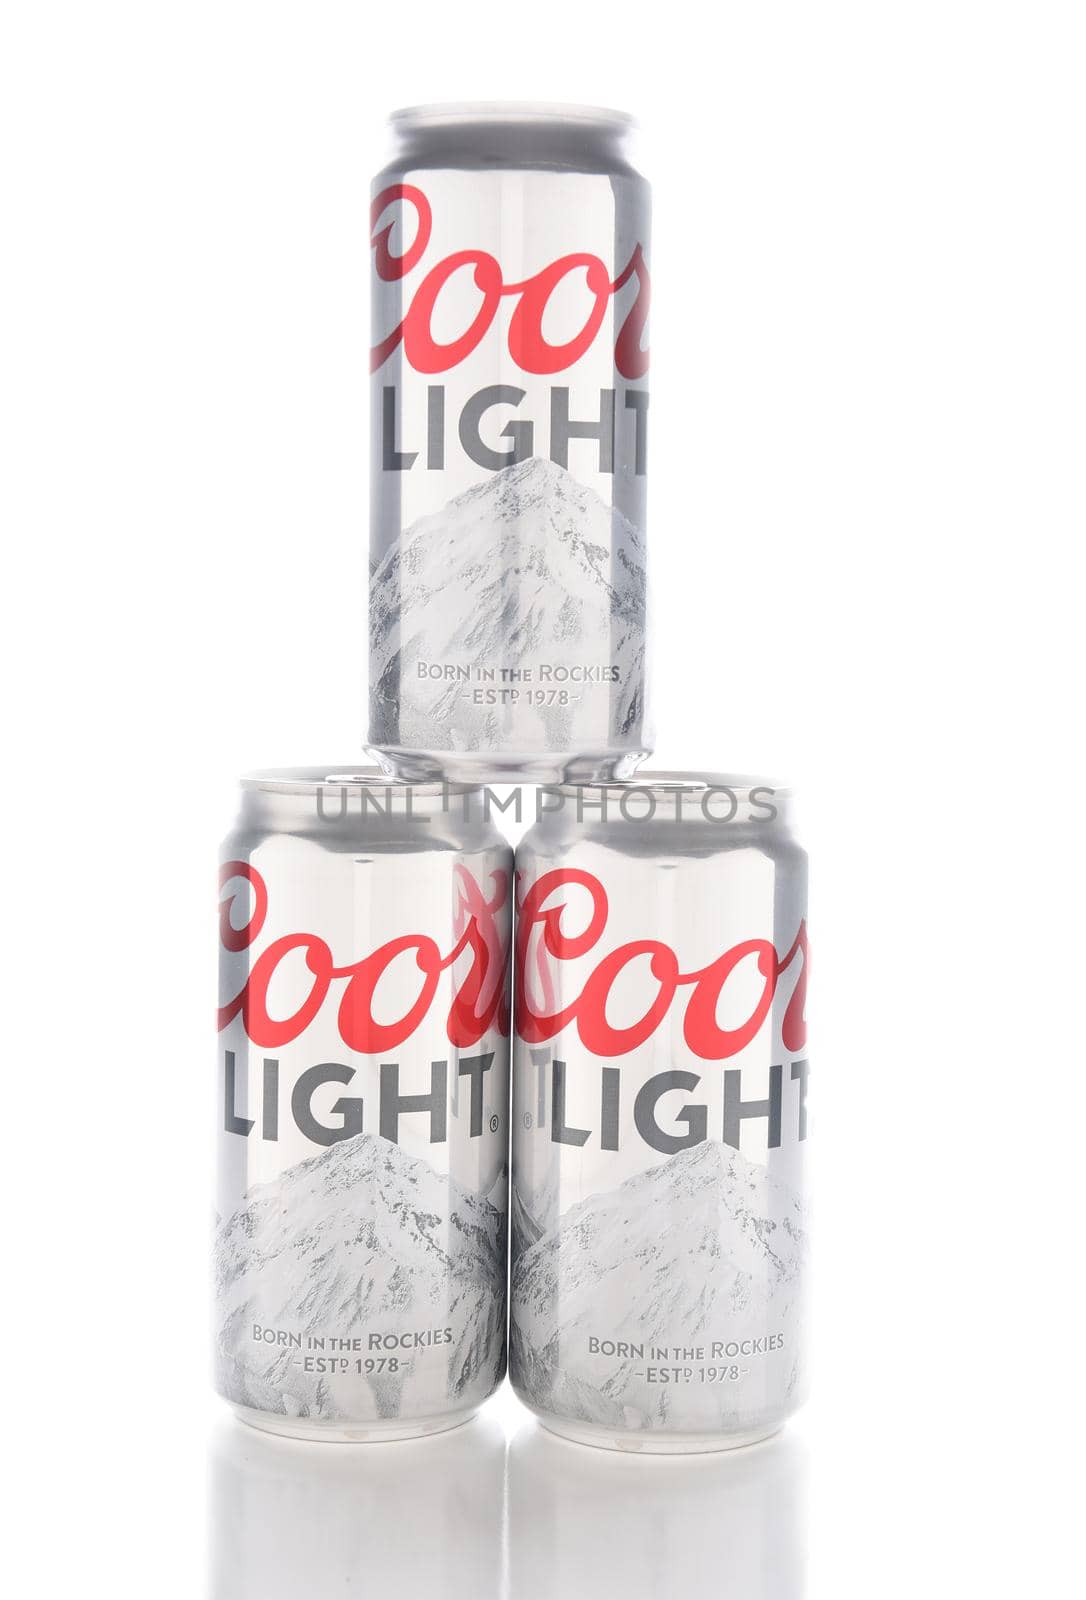 IRVINE, CALIFORNIA - JANUARY 8, 2017: Coors Light cans. Coors Light is a lager style beer brewed by Coors Brewing Company in Golden, Colorado.